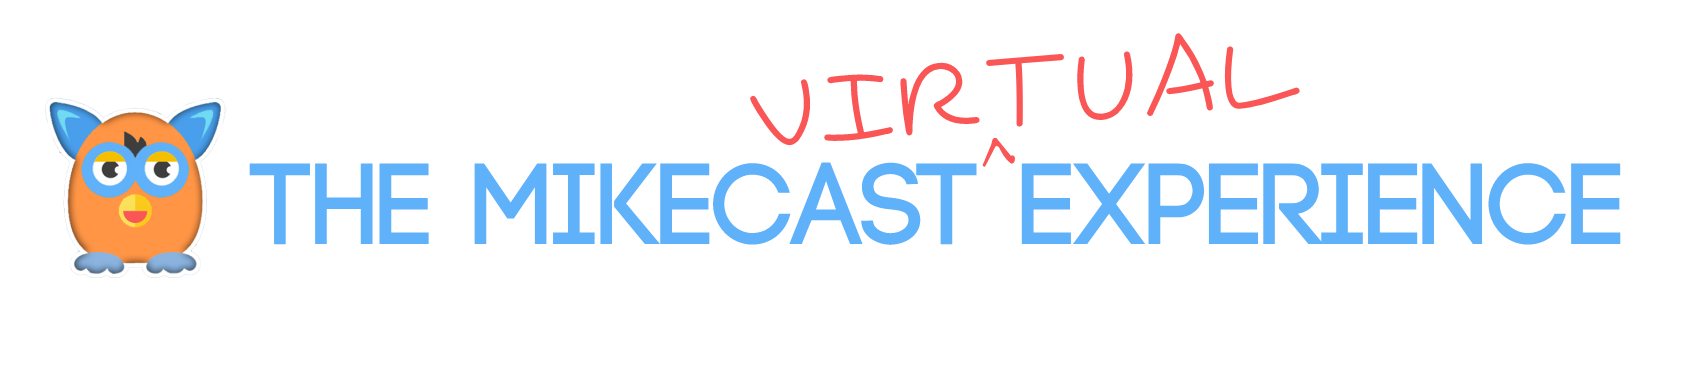 Mikecast: Virtual Experience